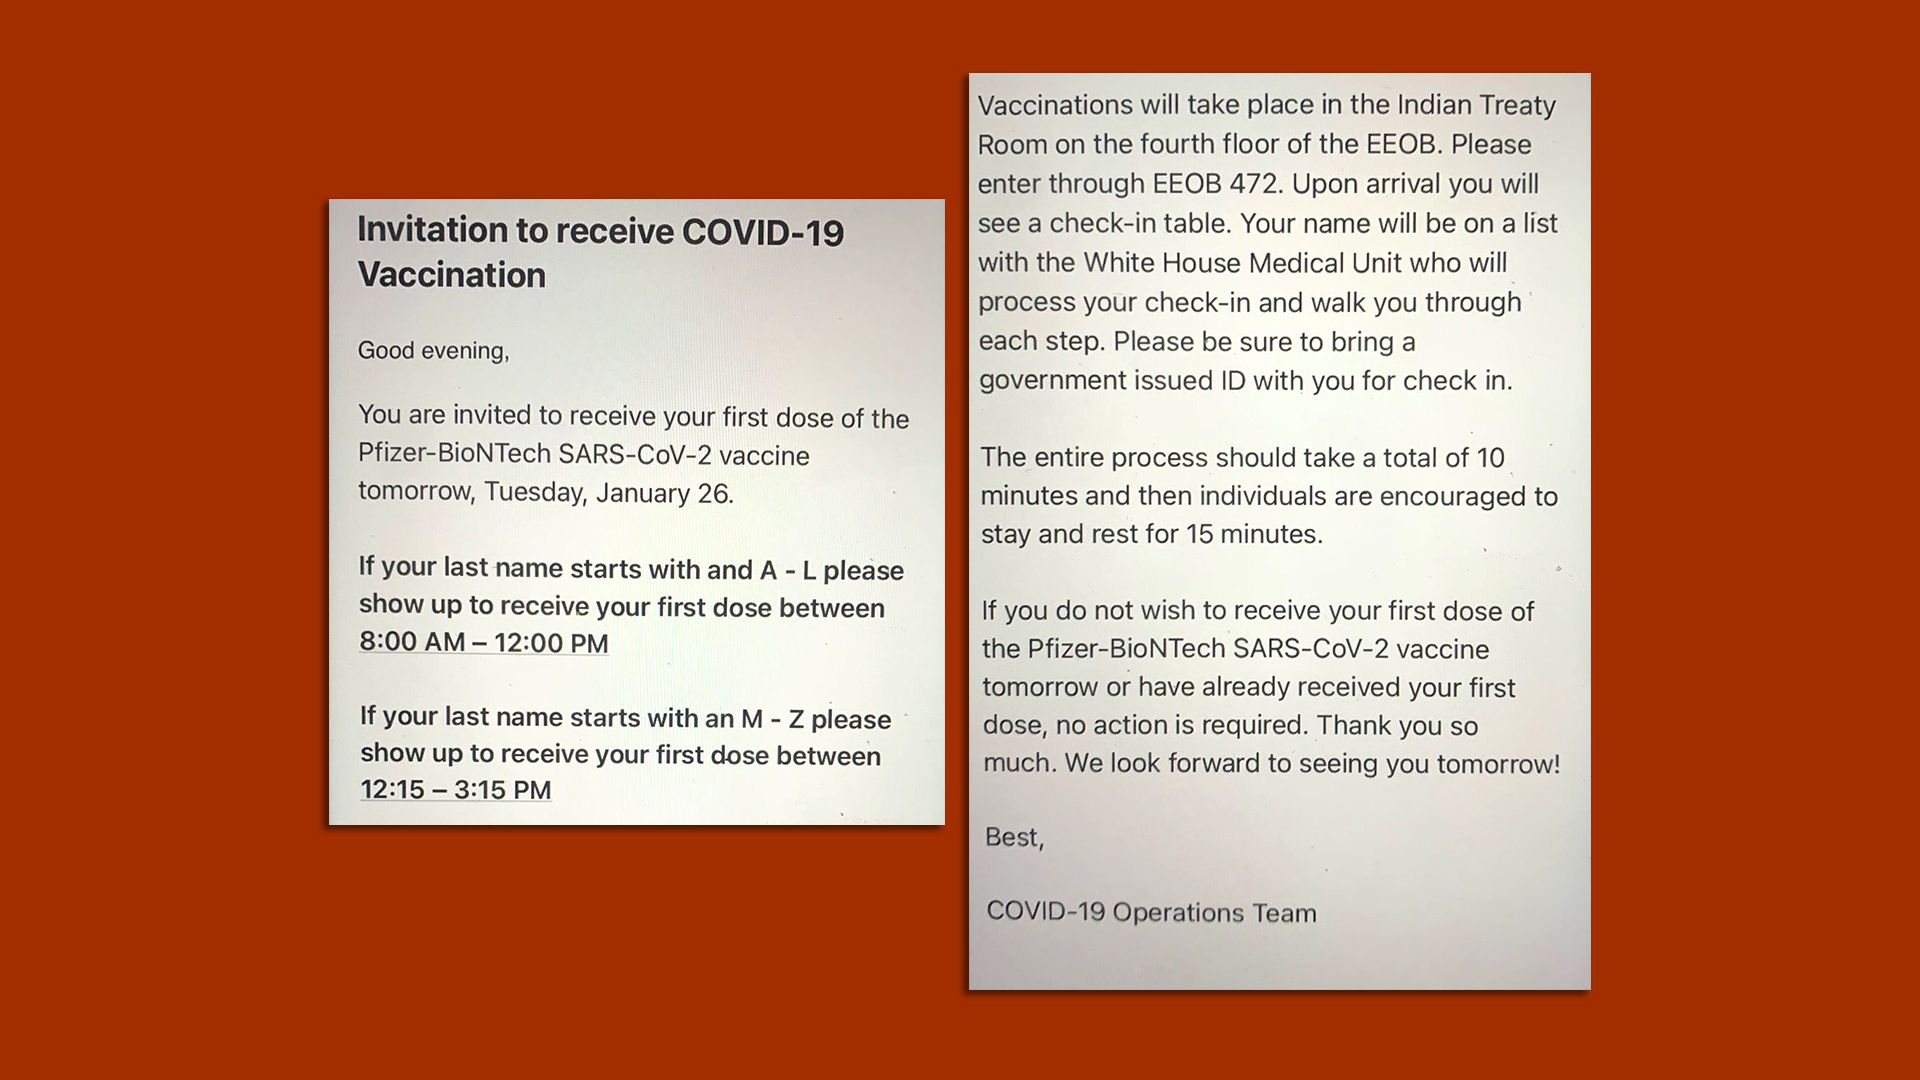 Screenshots of an email inviting White House staff to receive the COVID-19 vaccine